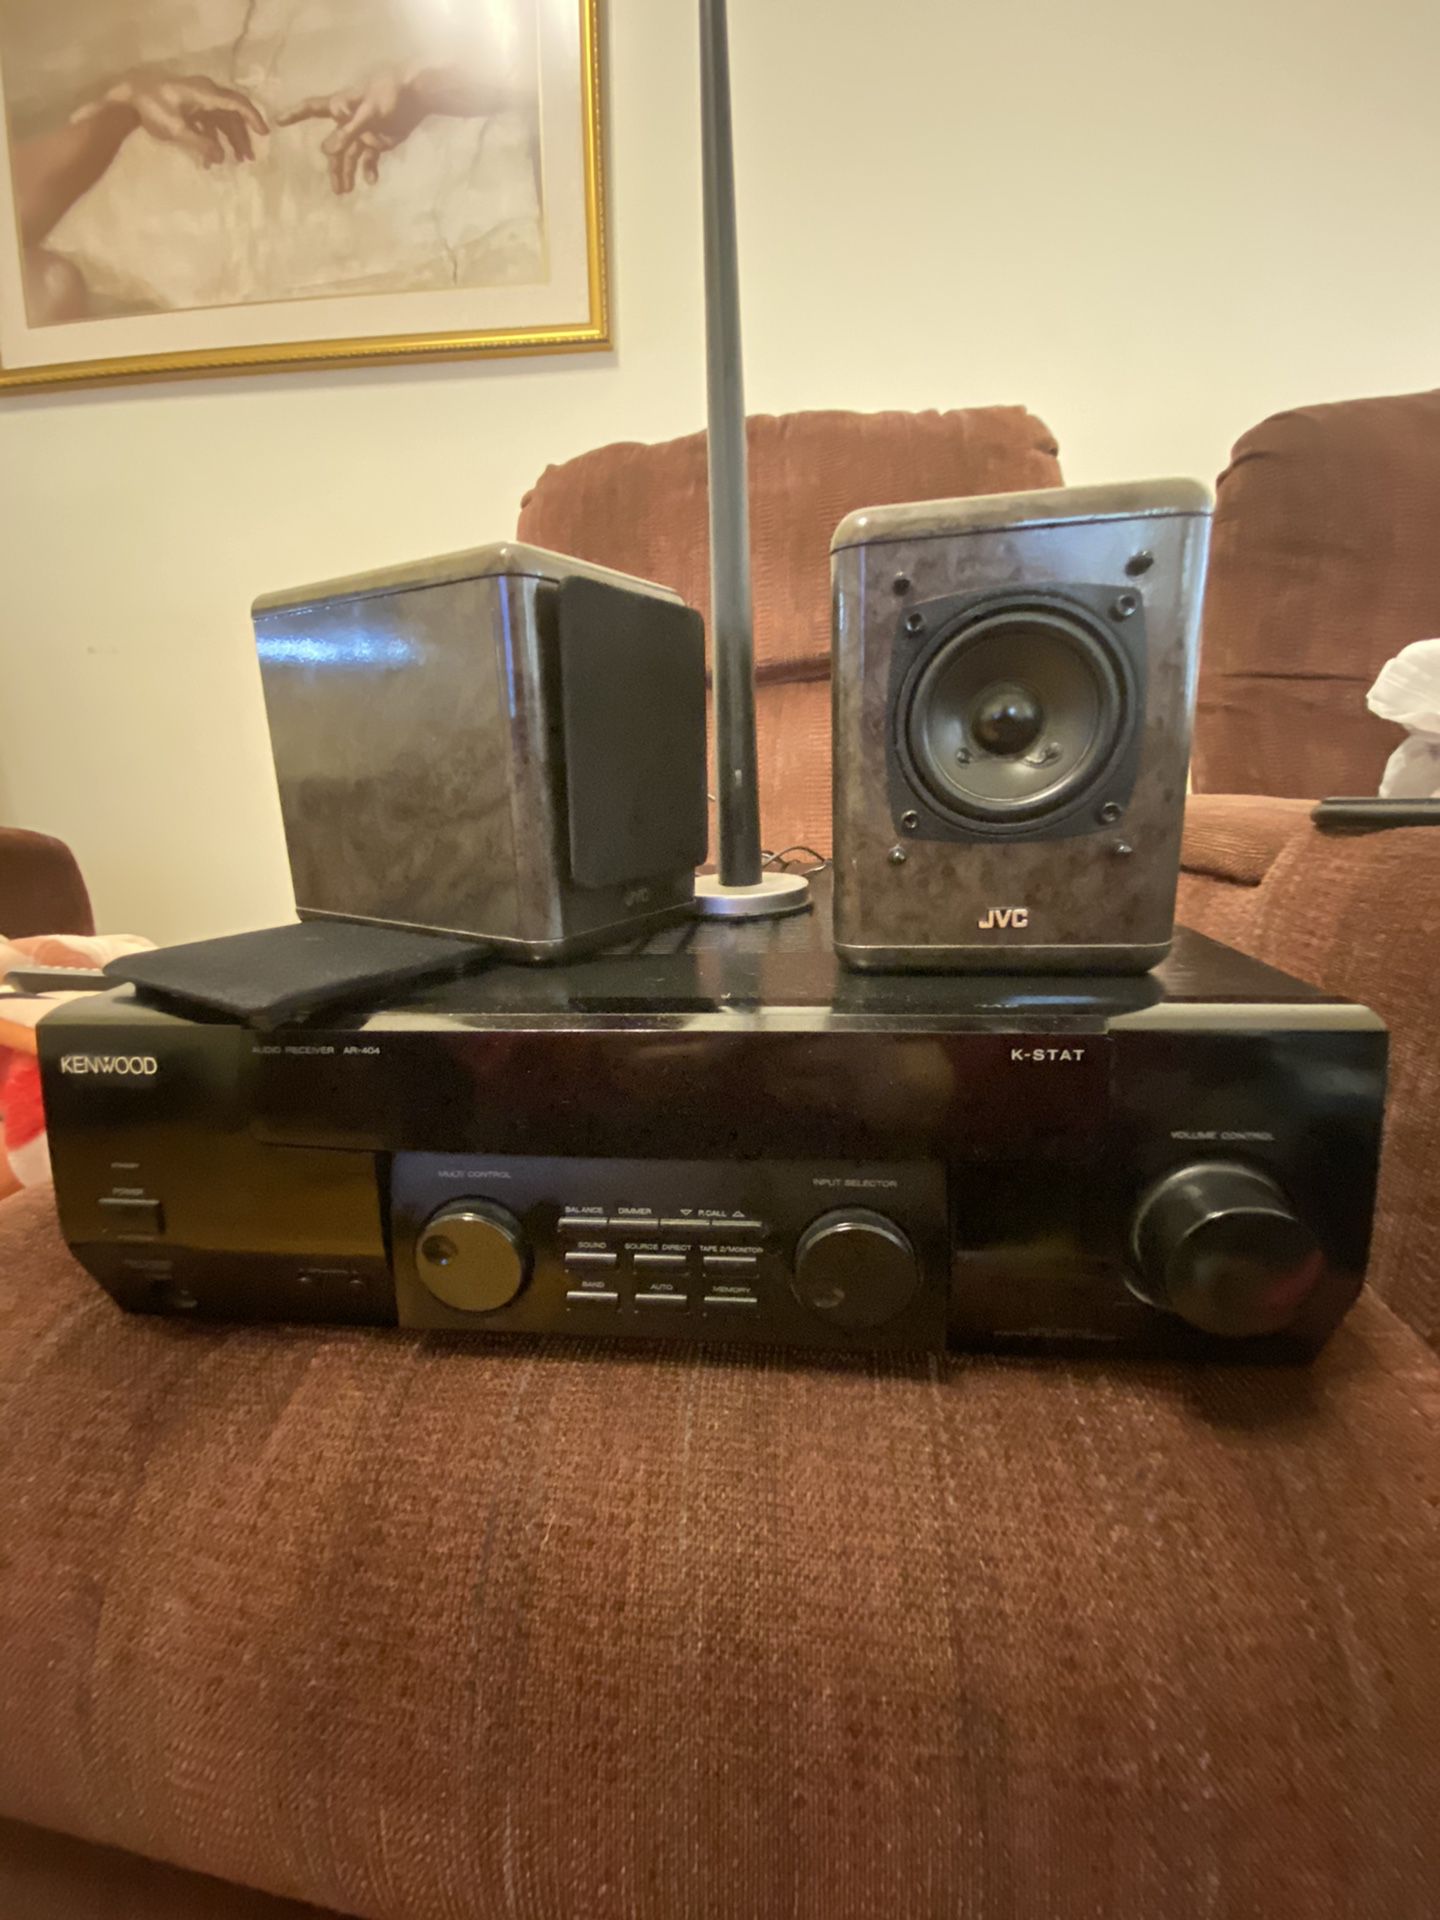 Kenwood 2.1 Stereo Receiver with JVC speakers